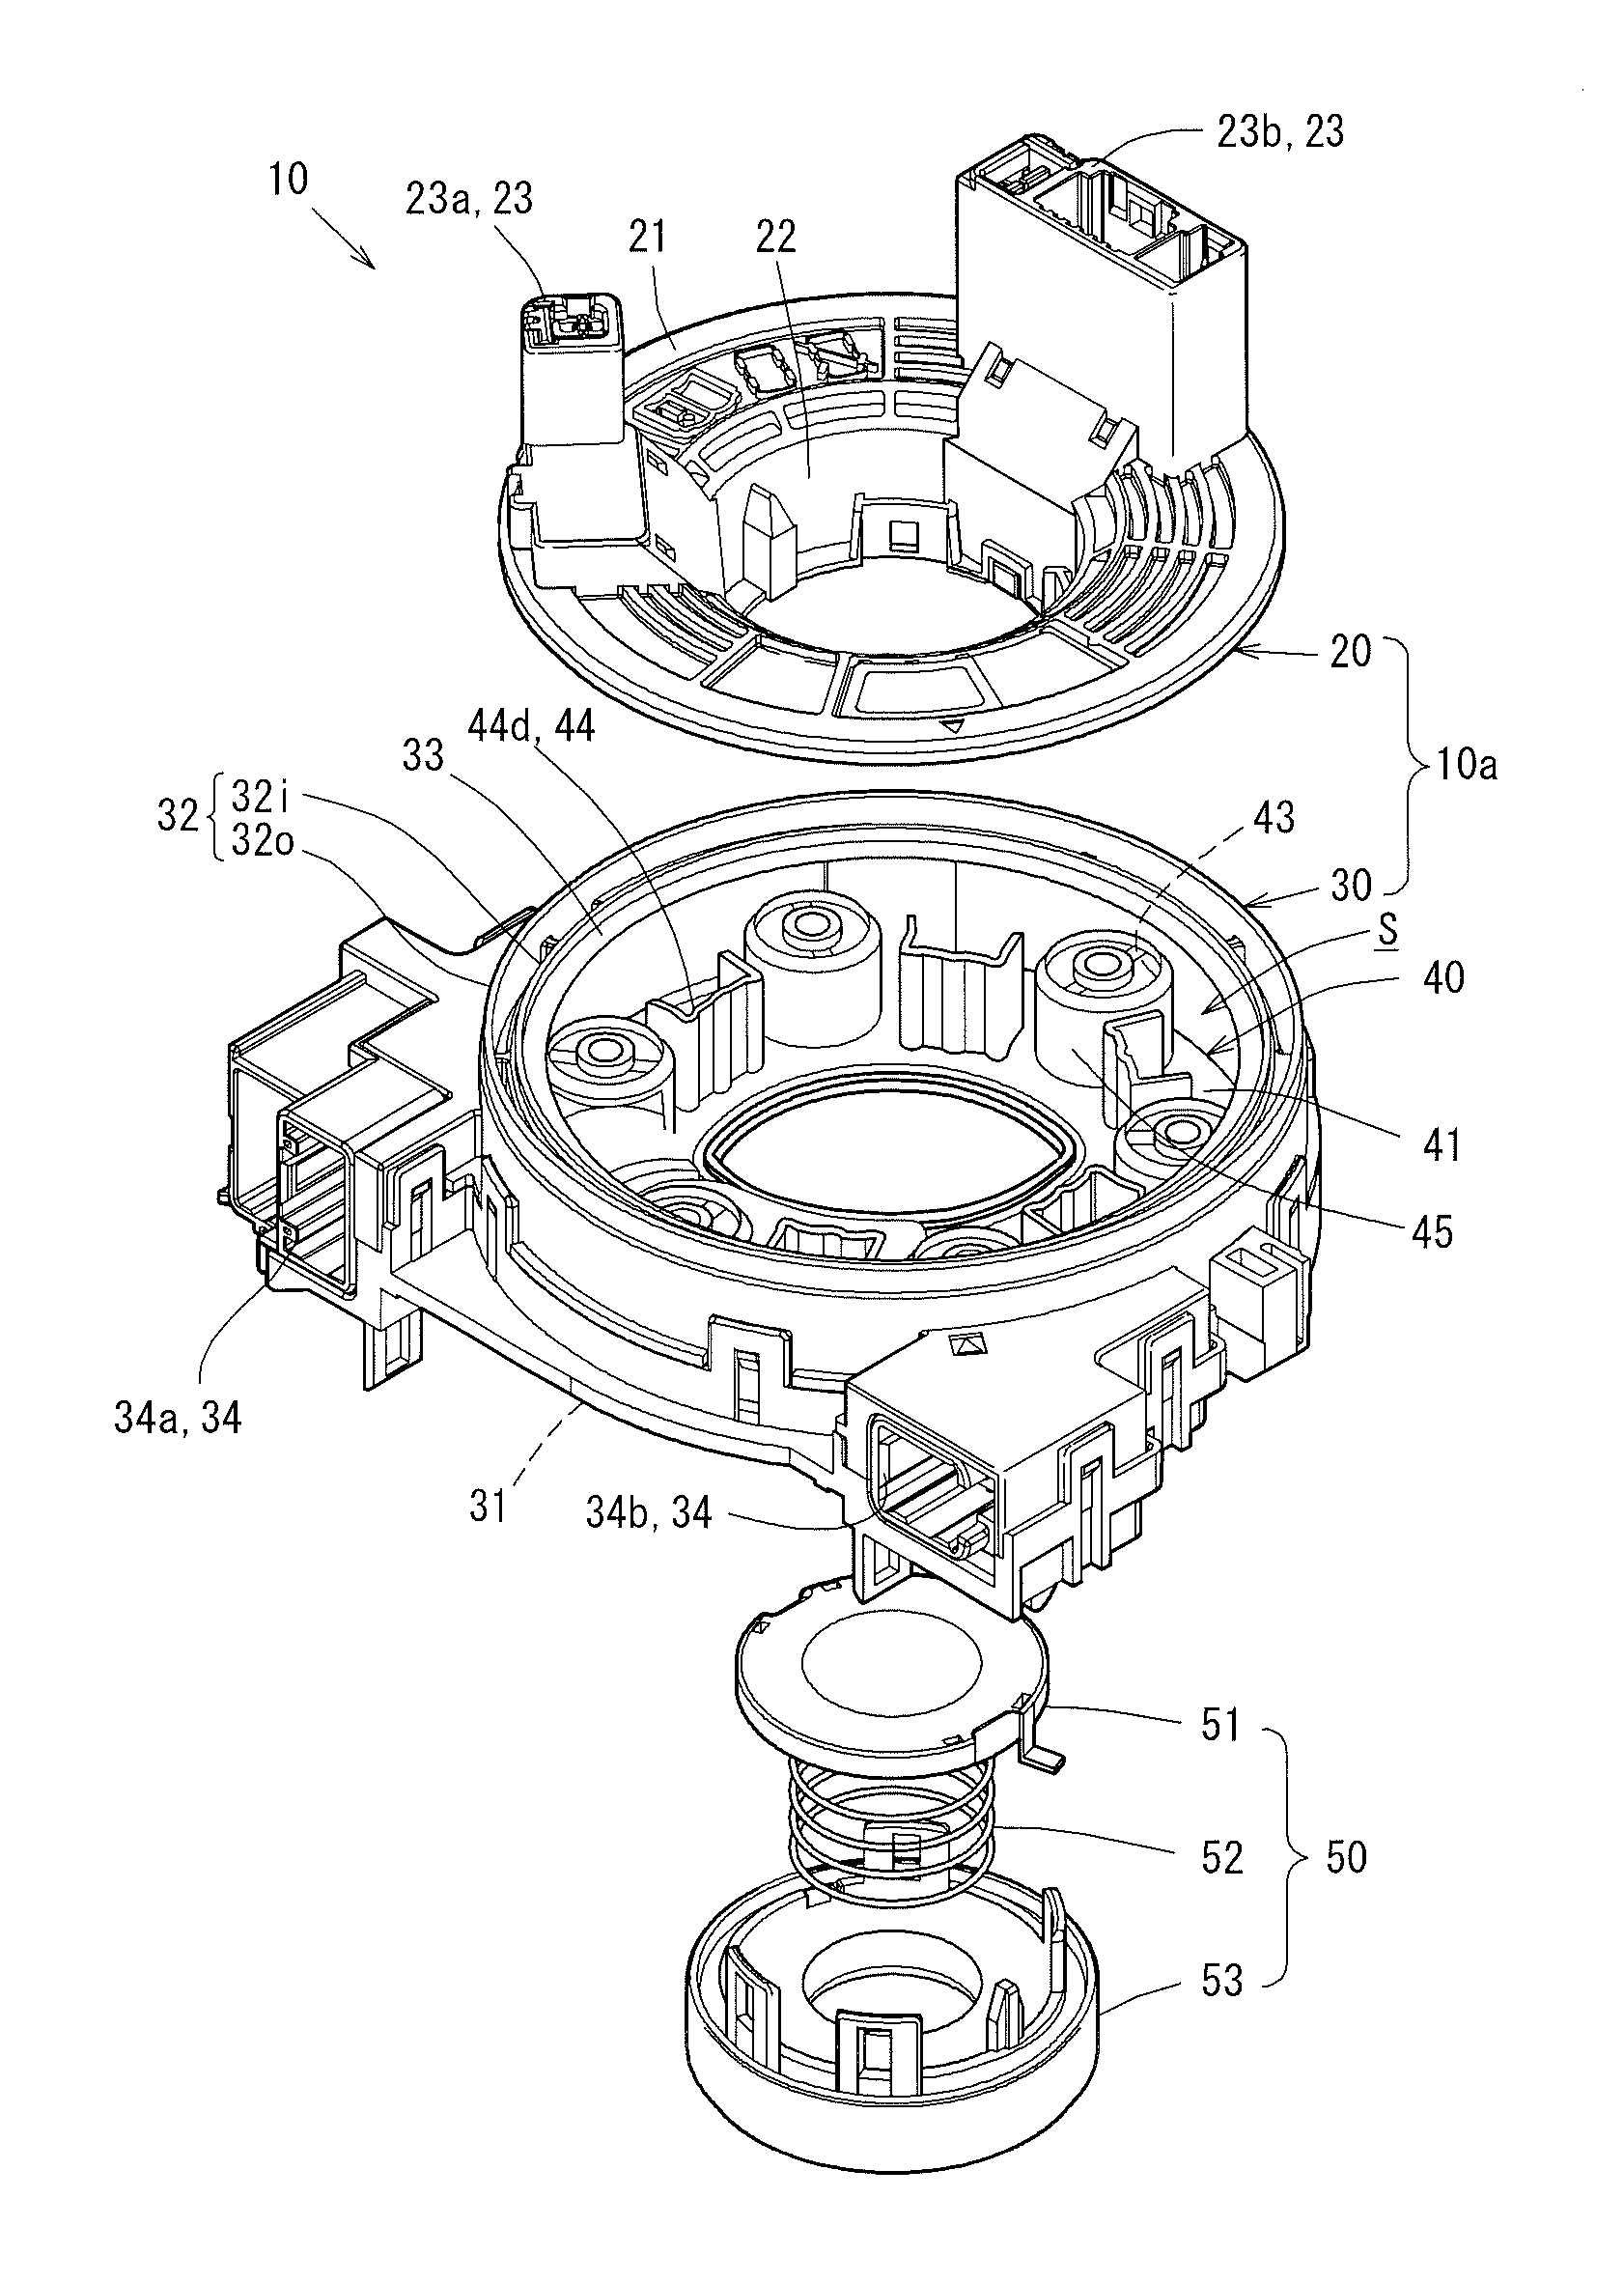 Rotatable connector device